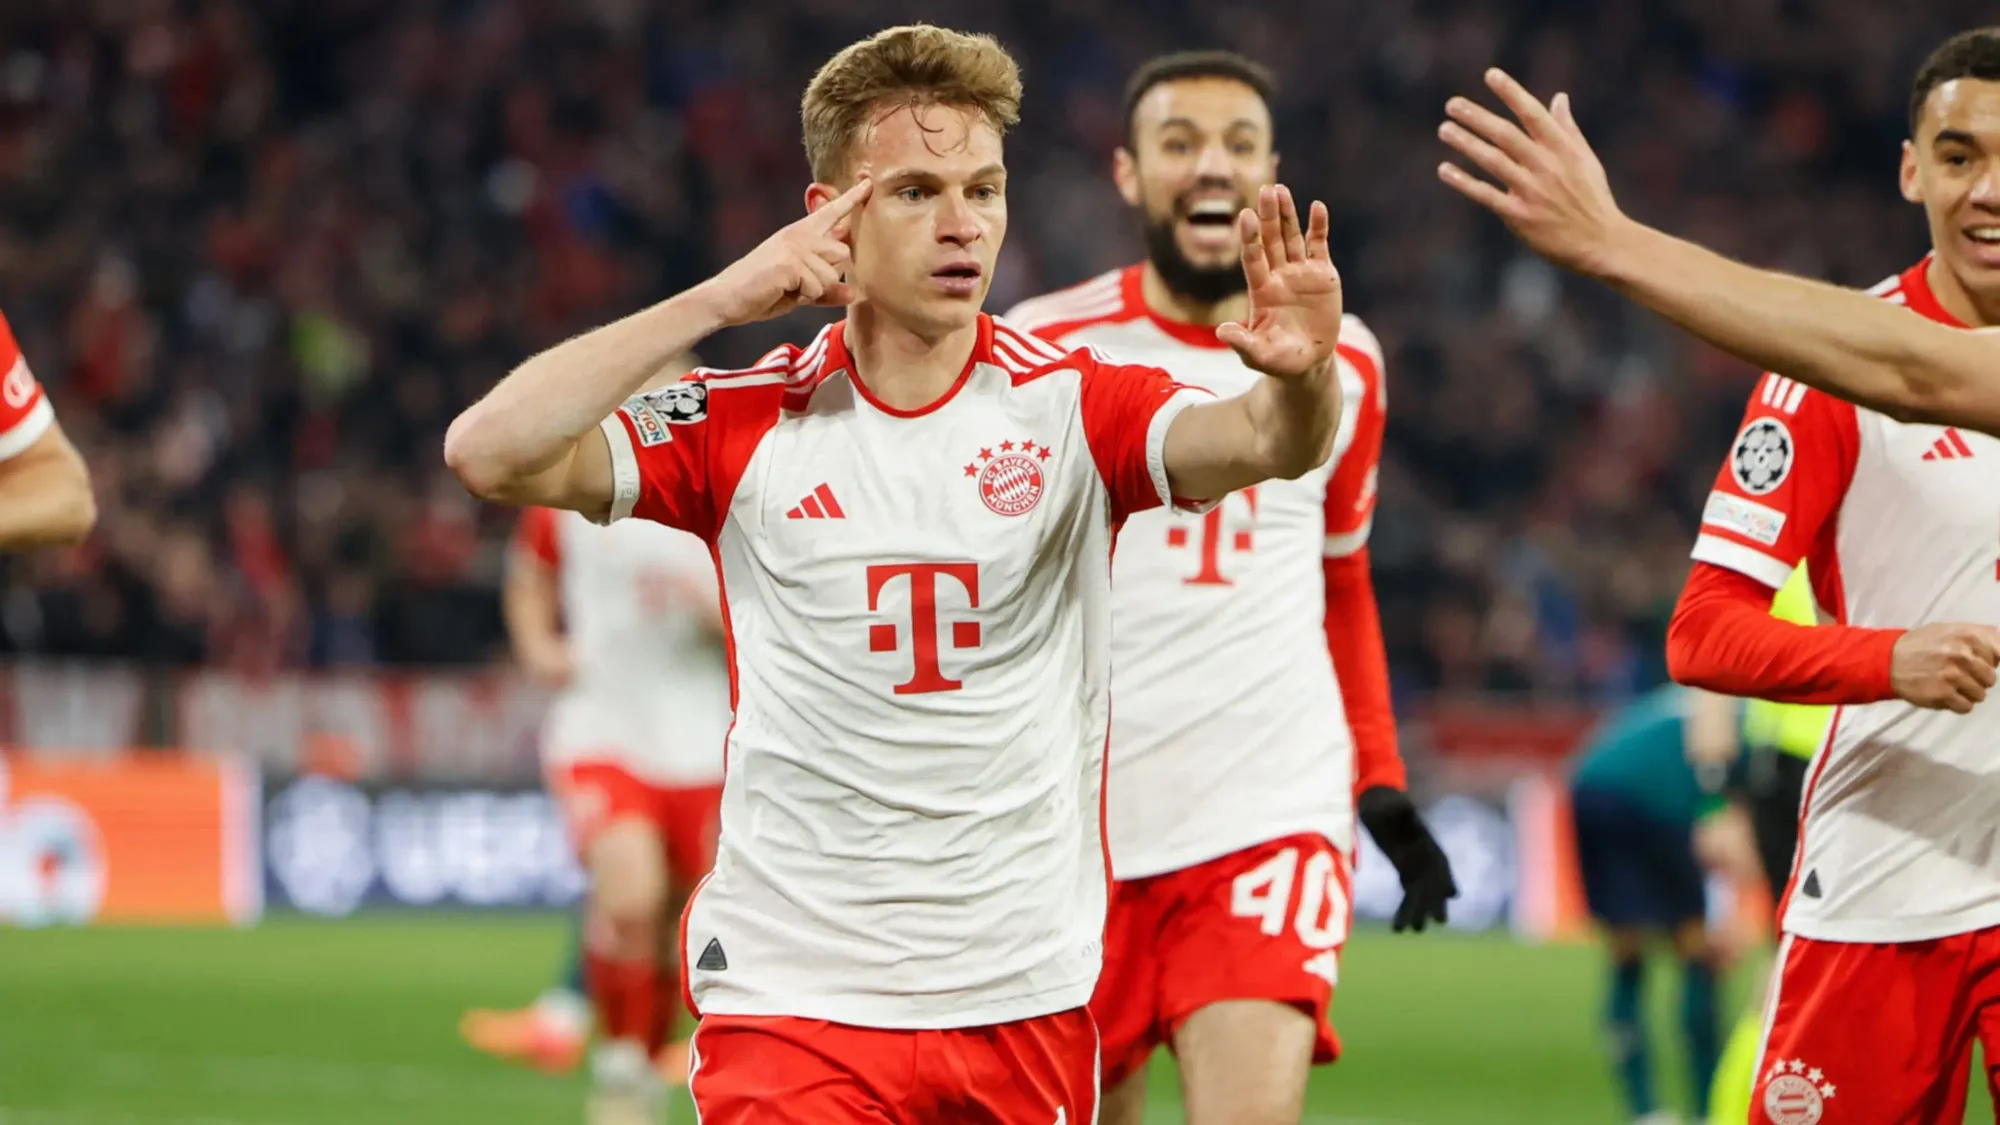 Joshua Kimmich celebrating his match-winning goal against Arsenal in UCL 23-24 Quarterfinals | UEFA Champions League 2023 -24 | Mania Sports